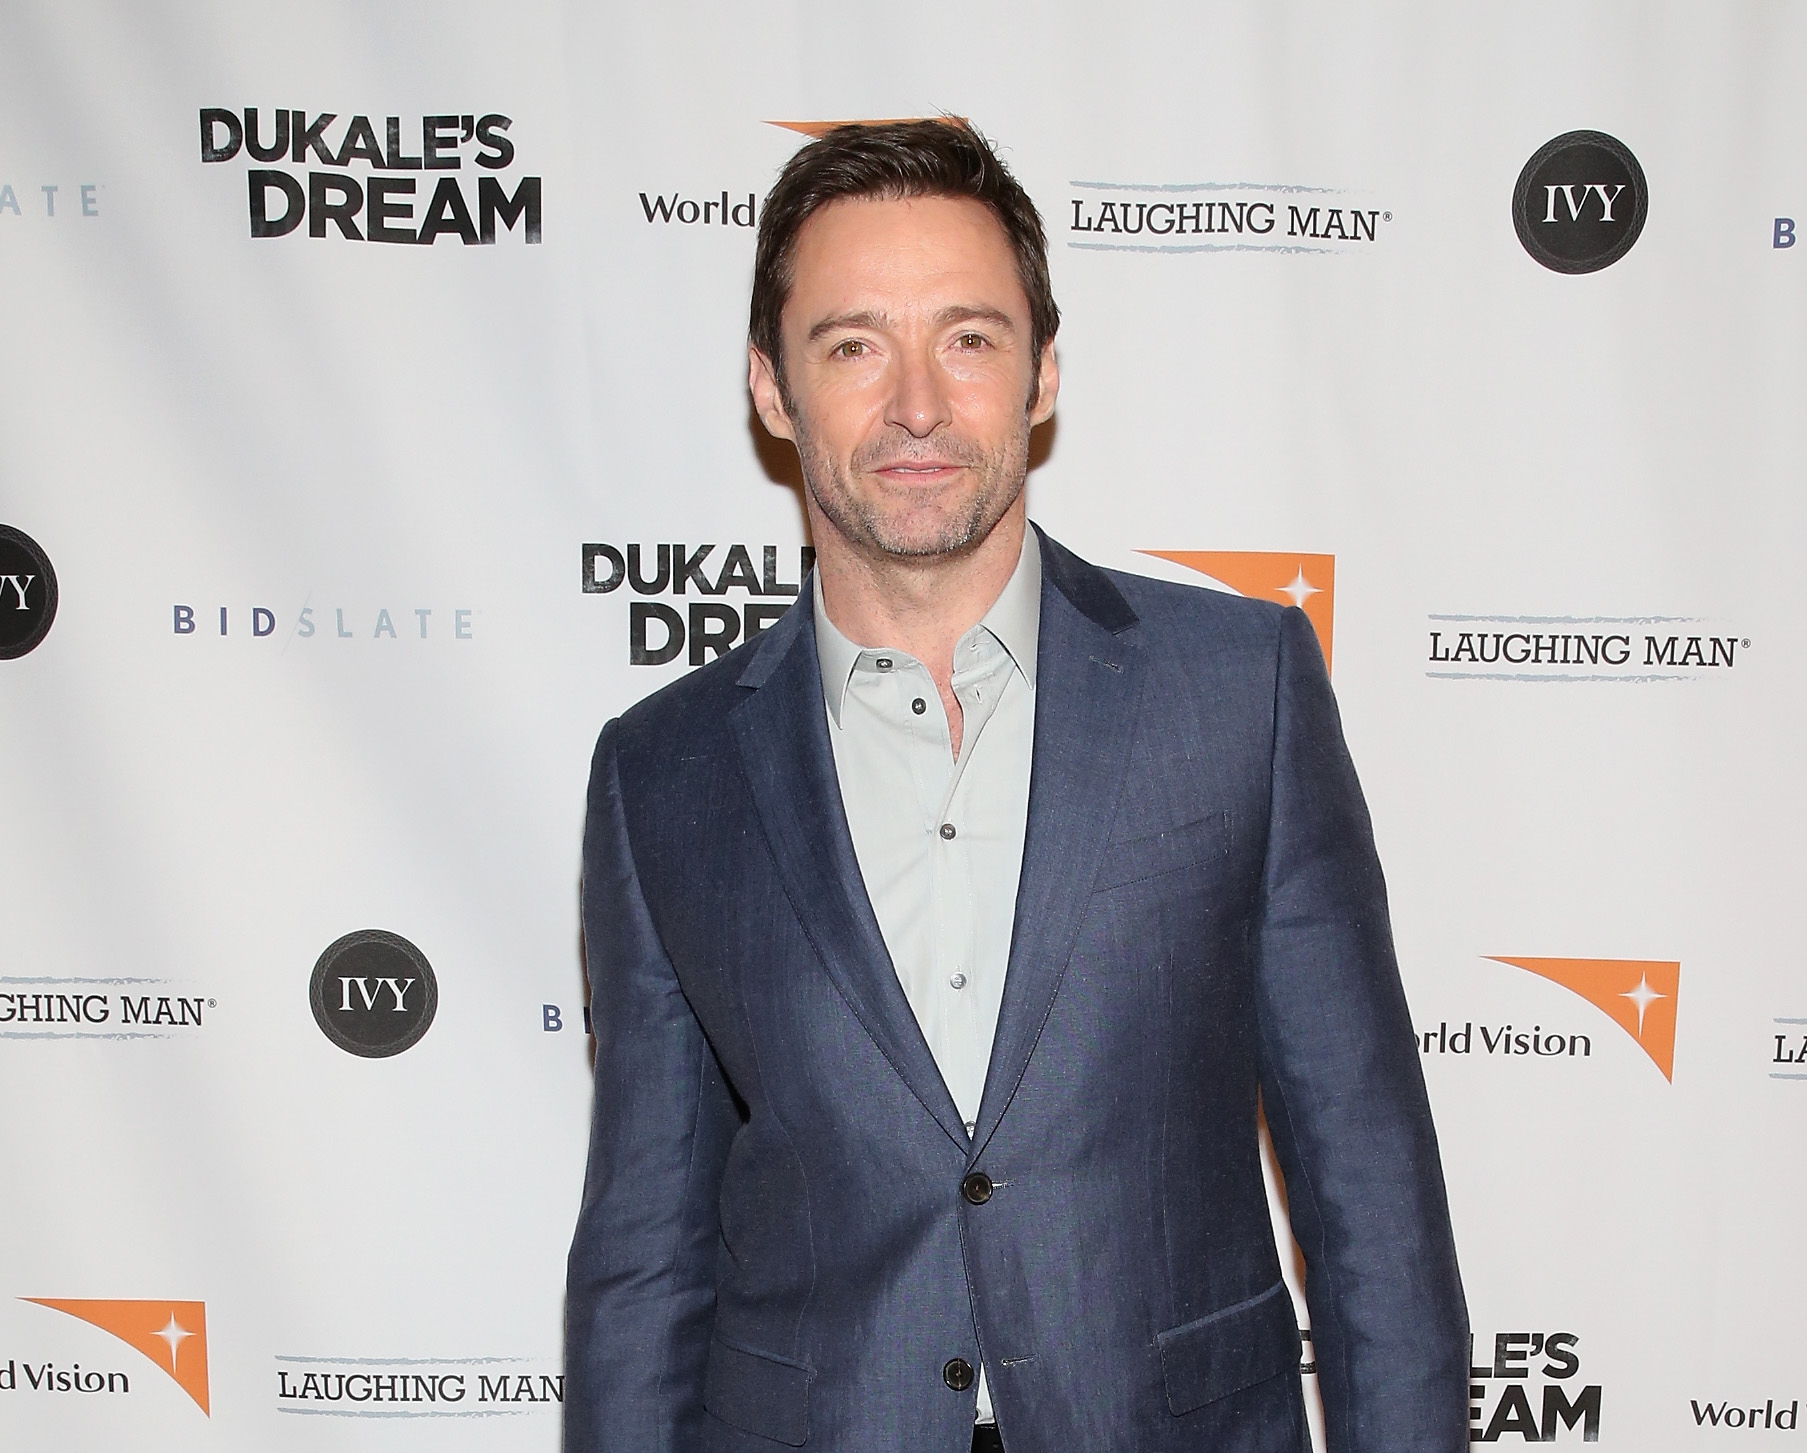 NEW YORK, NY - JUNE 04:  Actor Hugh Jackman attends the premiere of Dukale's Dream on June 4, 2015 in New York City.  (Photo by Robin Marchant/Getty Images for The 7th Floor) (Robin Marchant&mdash;2015 Getty Images)